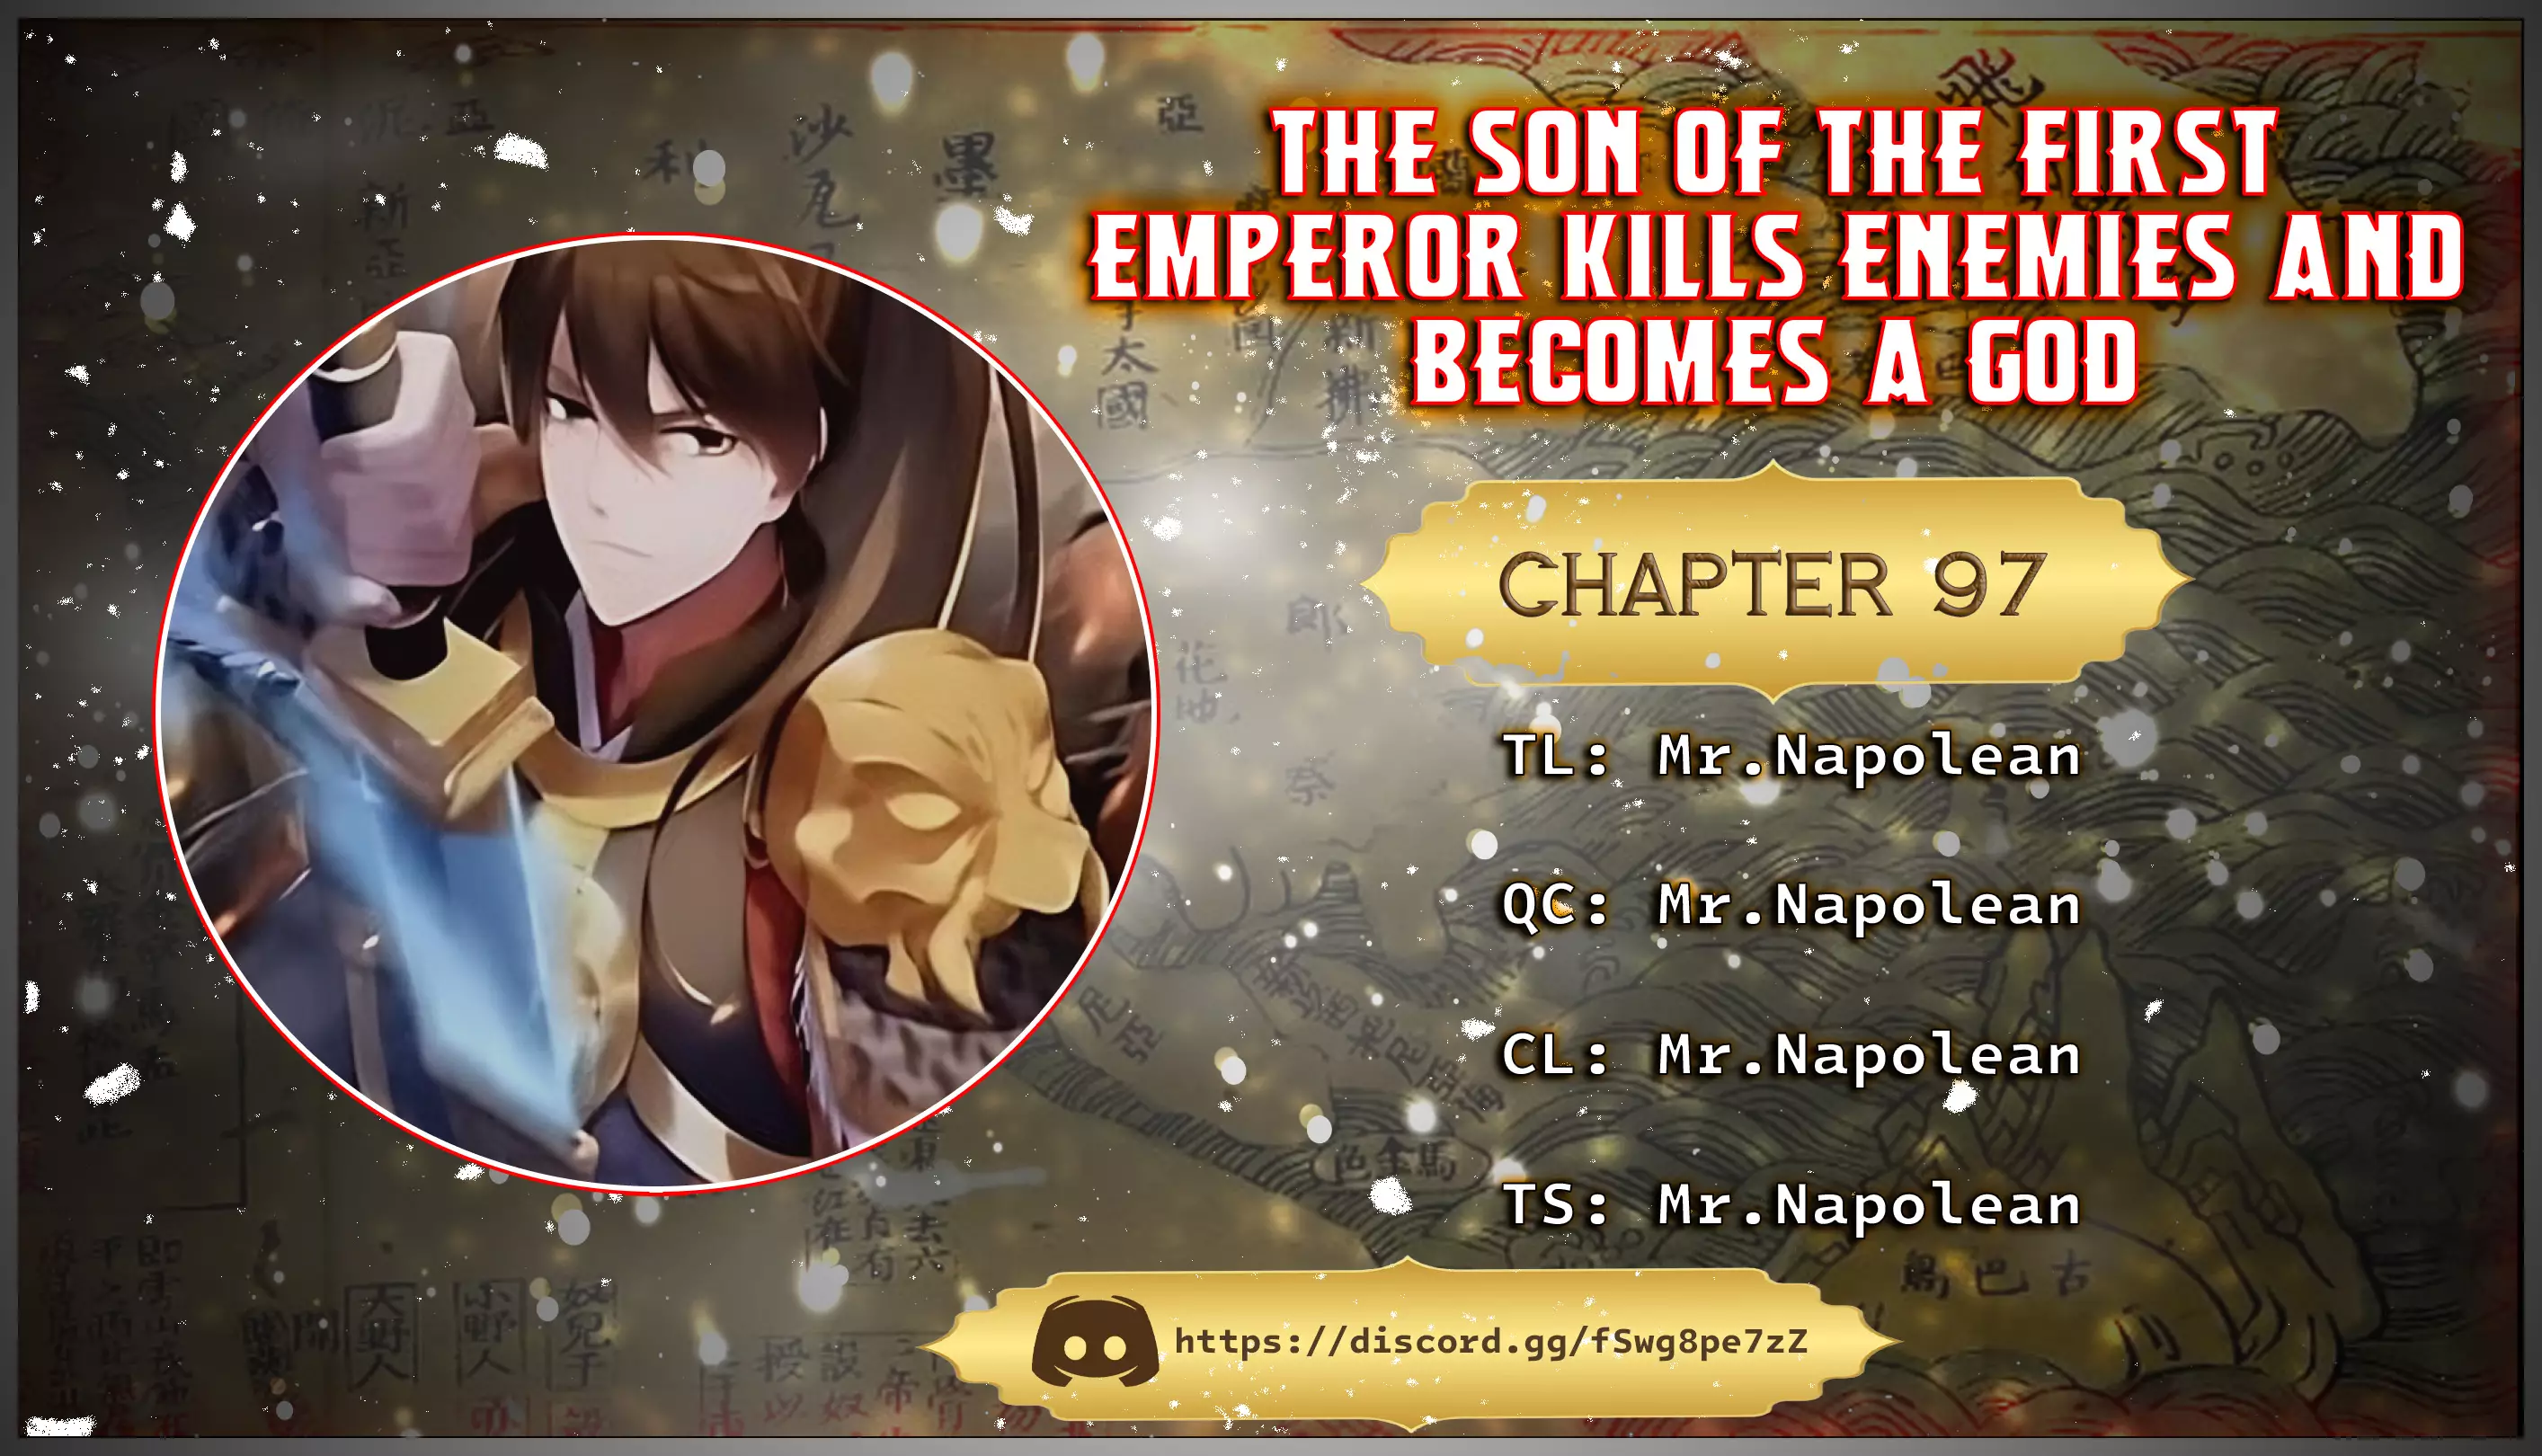 The Son Of The First Emperor Kills Enemies And Becomes A God - 97 page 1-9eca7490